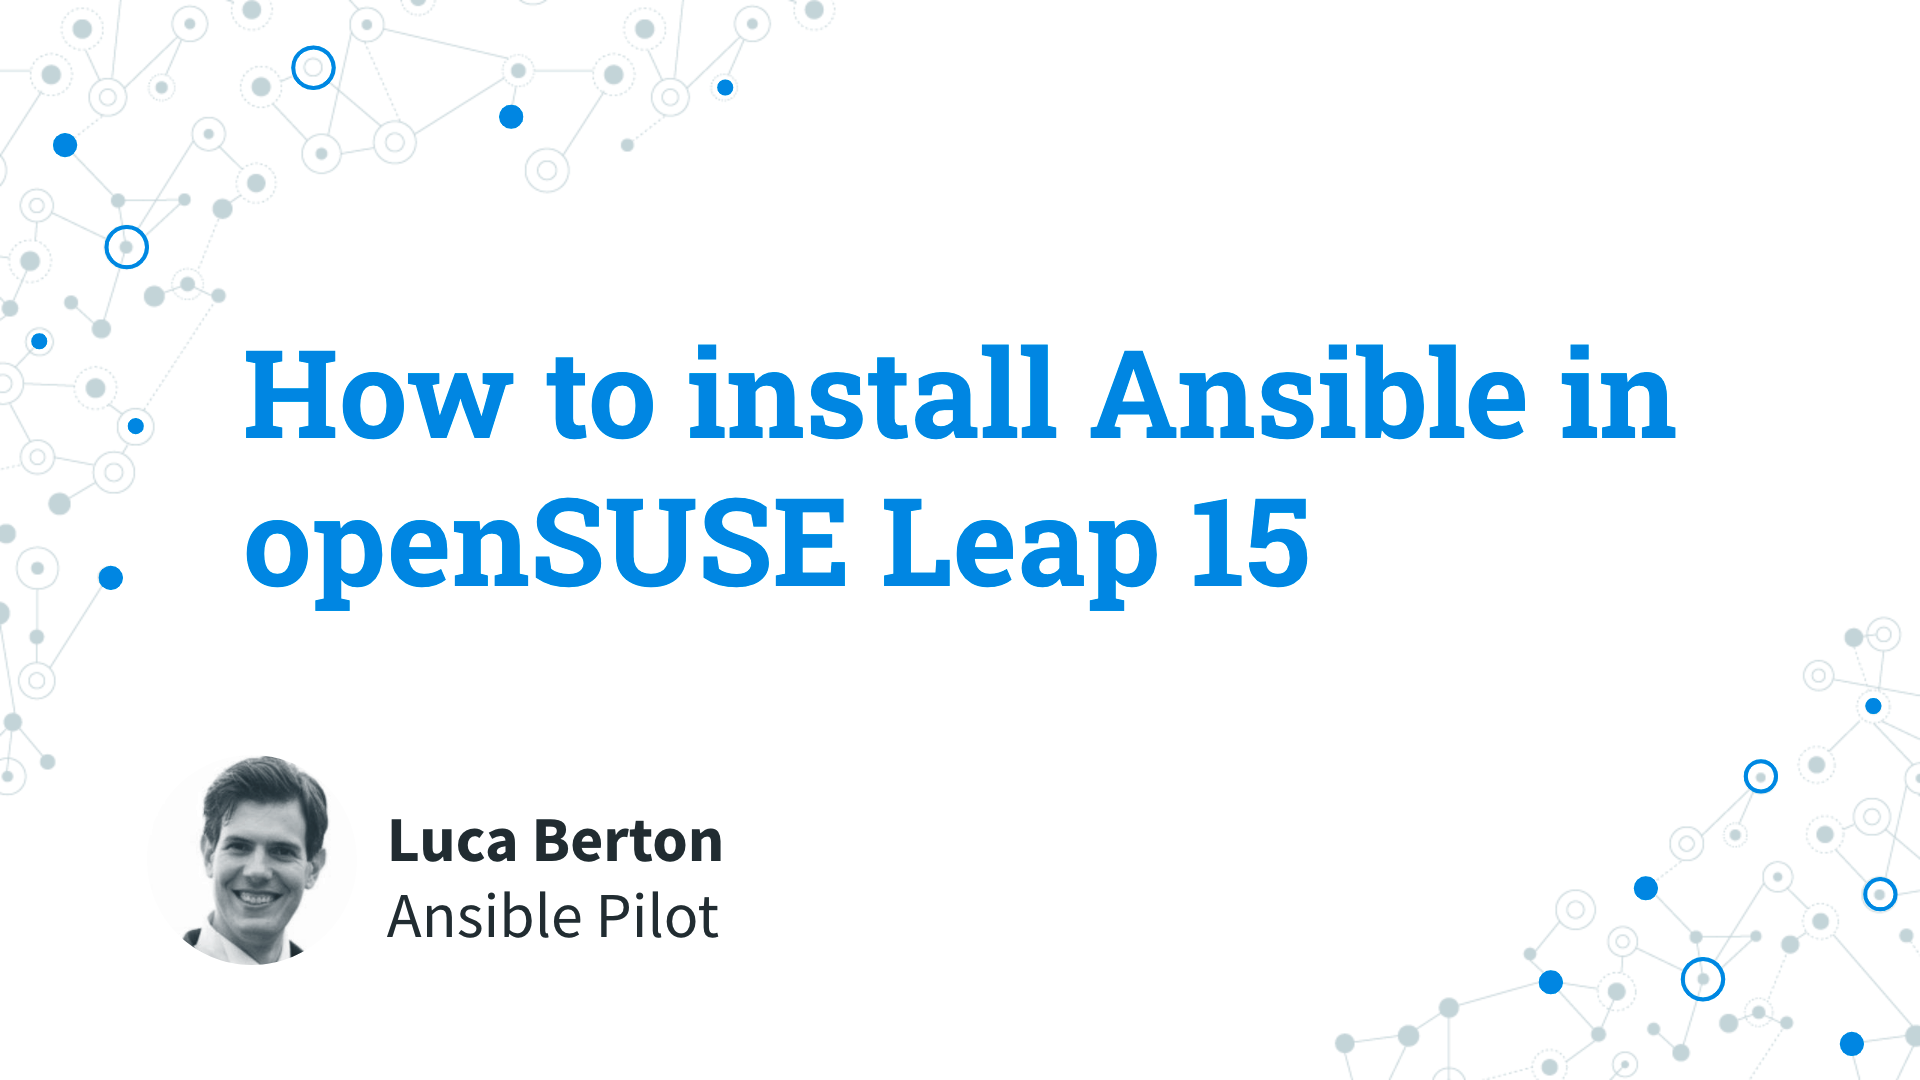 How to install Ansible in OpenSUSE Leap 15 - Ansible install